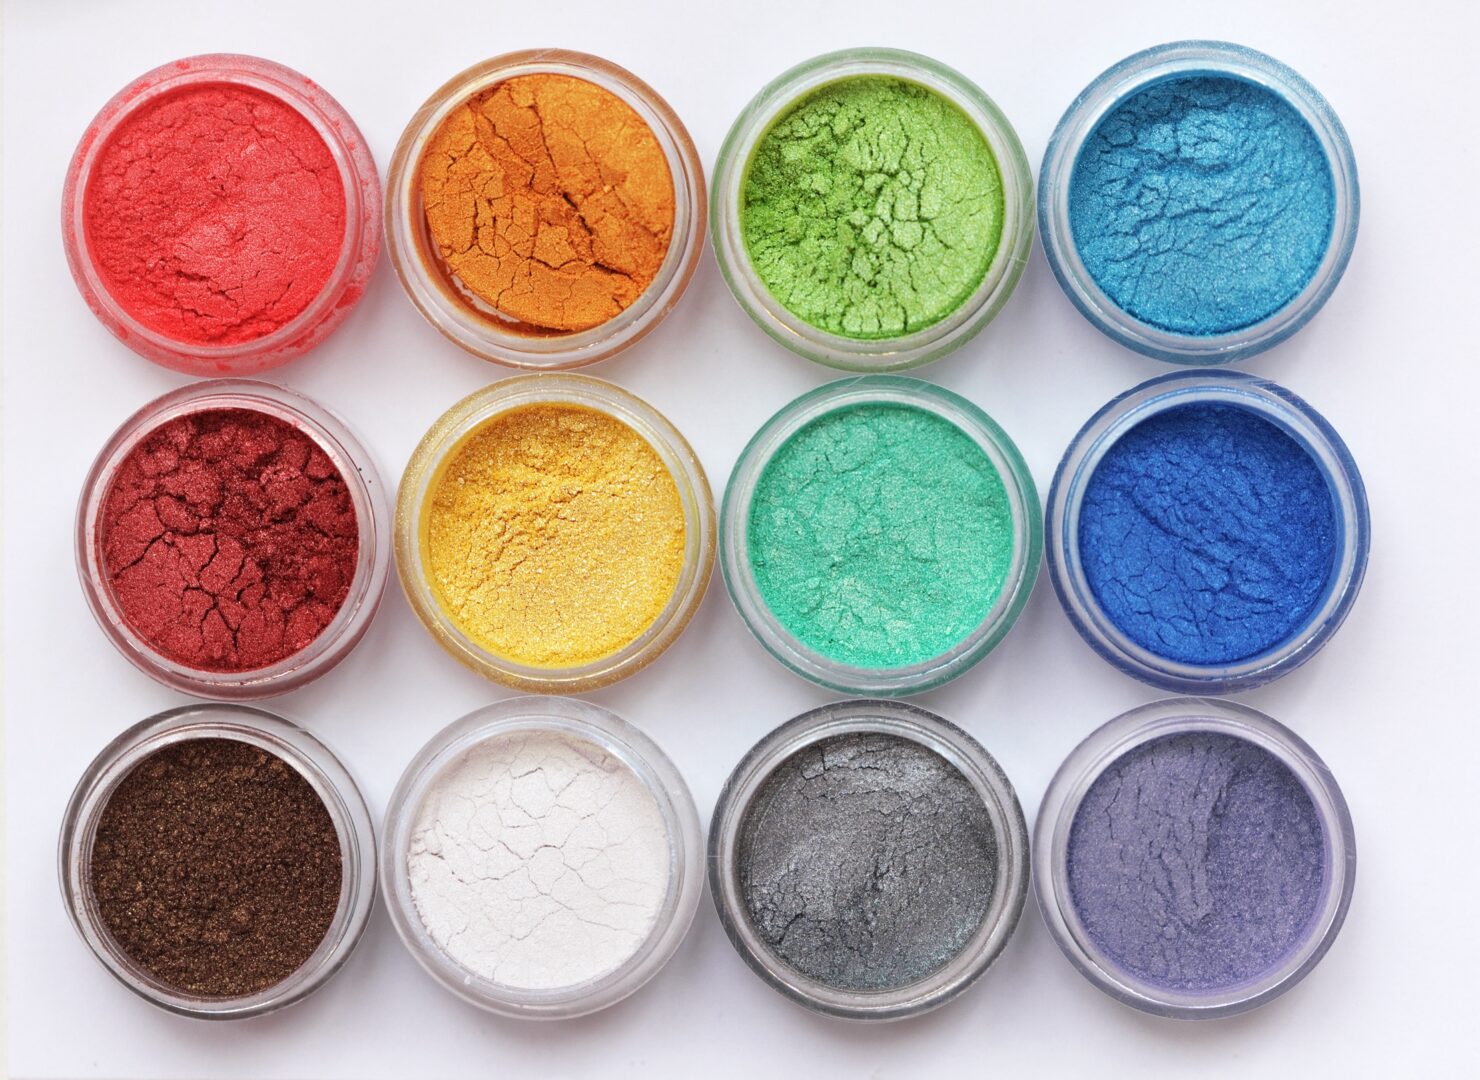 A variety of colored powders in small bowls on a white background.